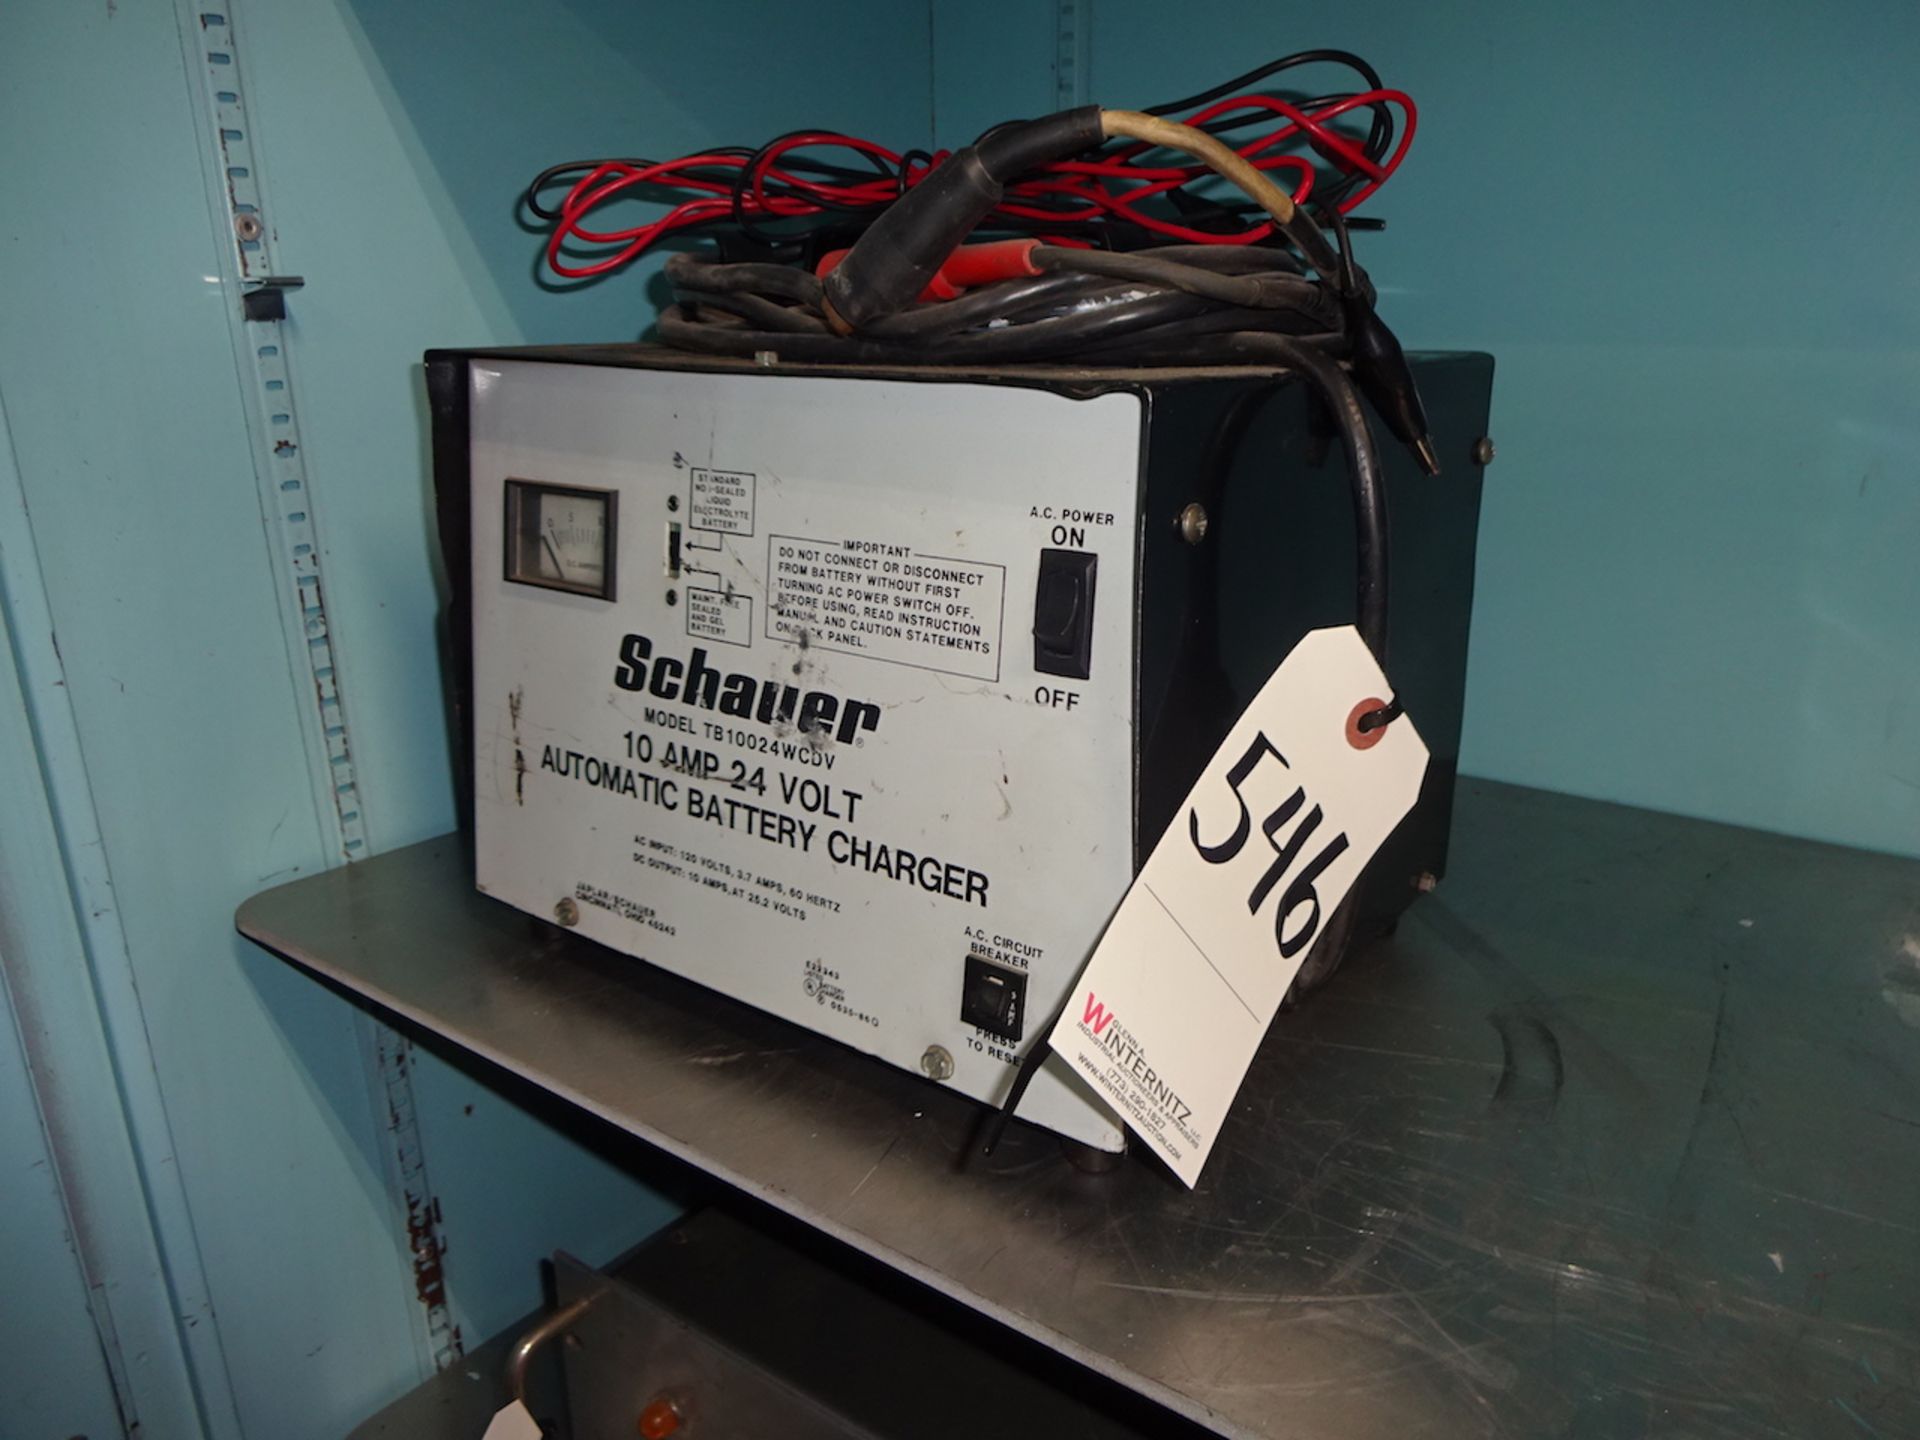 Schauer Model TB10024WCDV 10 Amp, 24 Volt Automatic Battery Charger